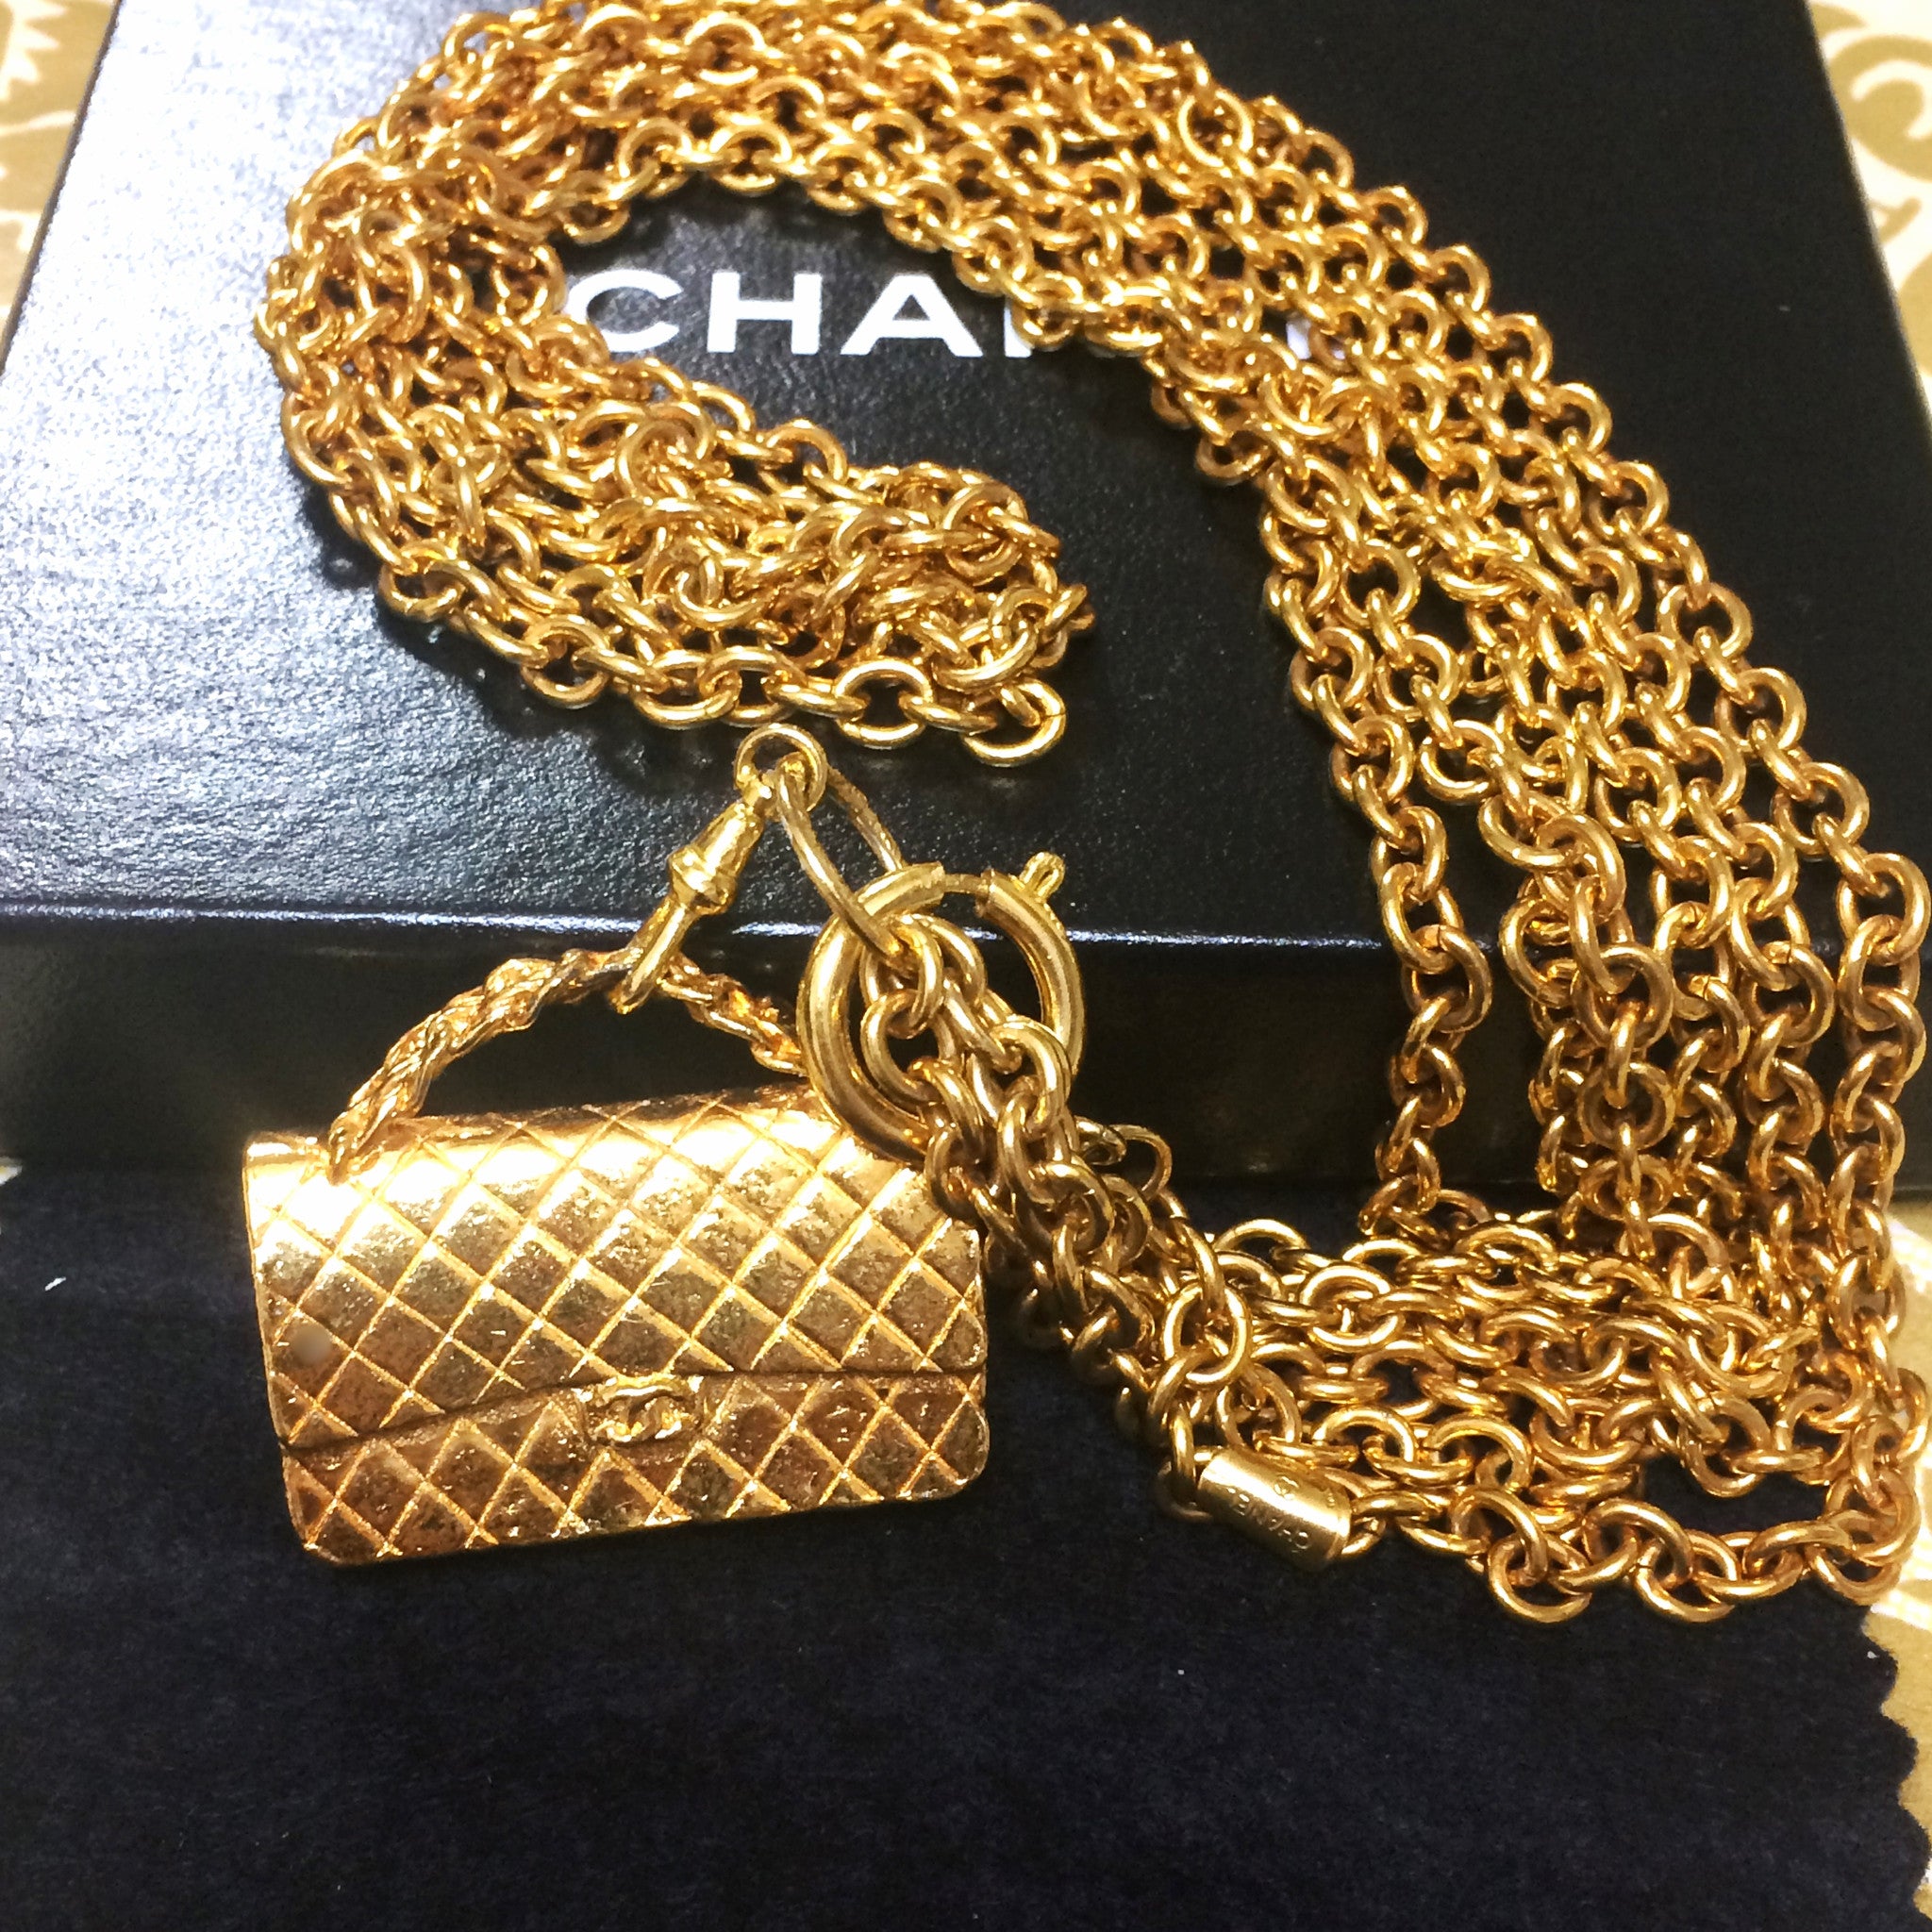 Vintage CHANEL golden double chain necklace with classic 2.55 bag